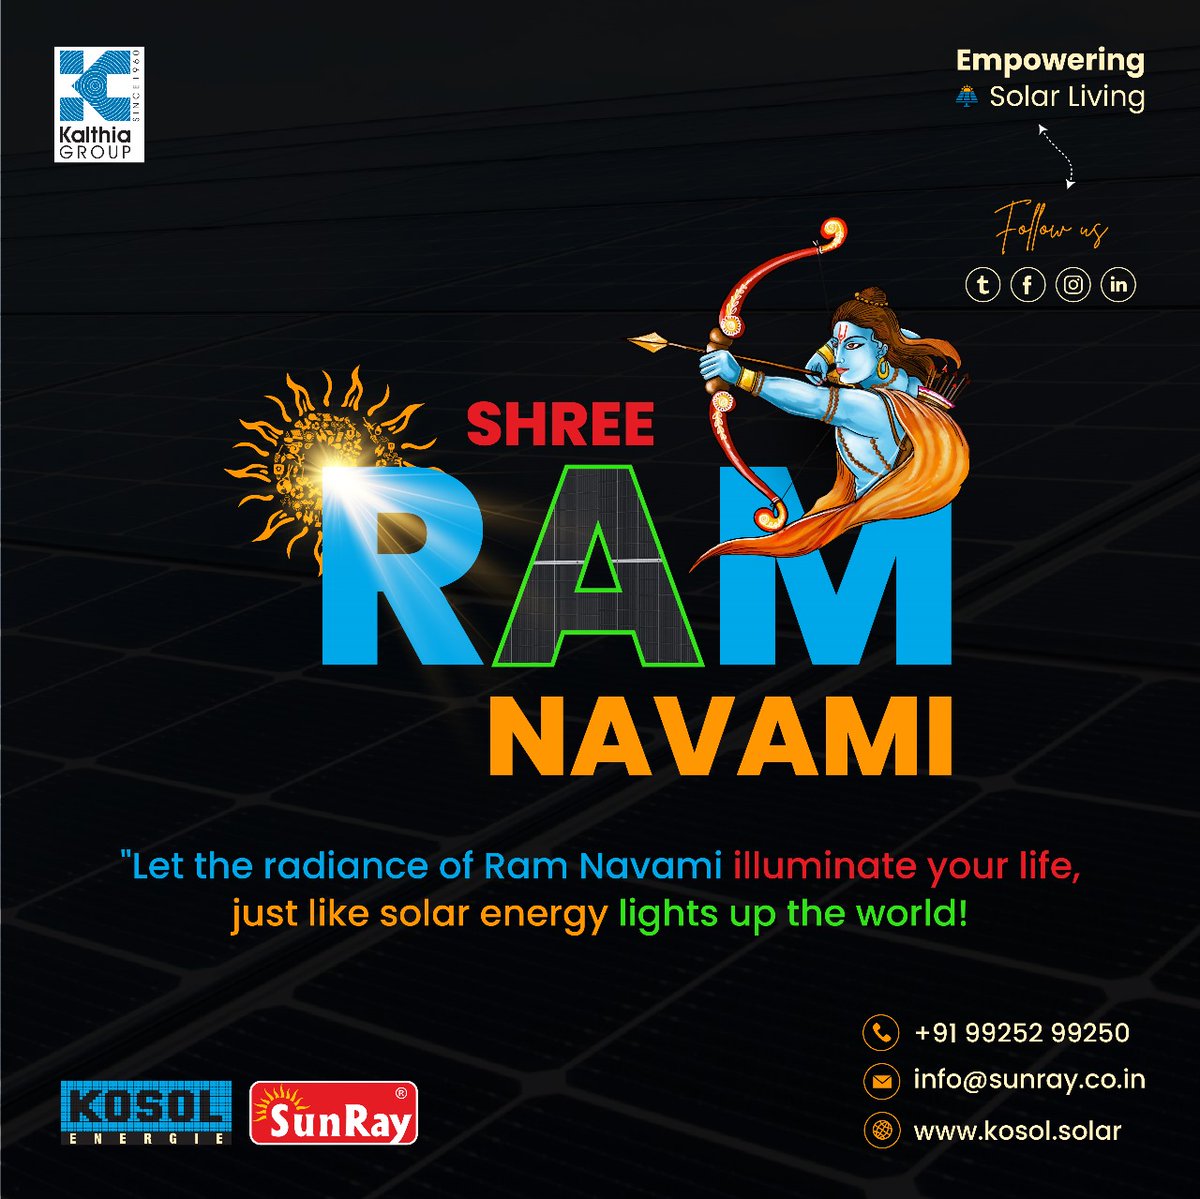 'Happy Ramnavmi! May the light of Lord Rama shine upon you, powered by Kosol Energie's solar panels. Wishing you a bright and sustainable future!'
#intersolar #SolarPower #solarenergy 
#solarpannels #solarmodules #solarcells #solarindustry #solarinnovation #solarinverter #Solar